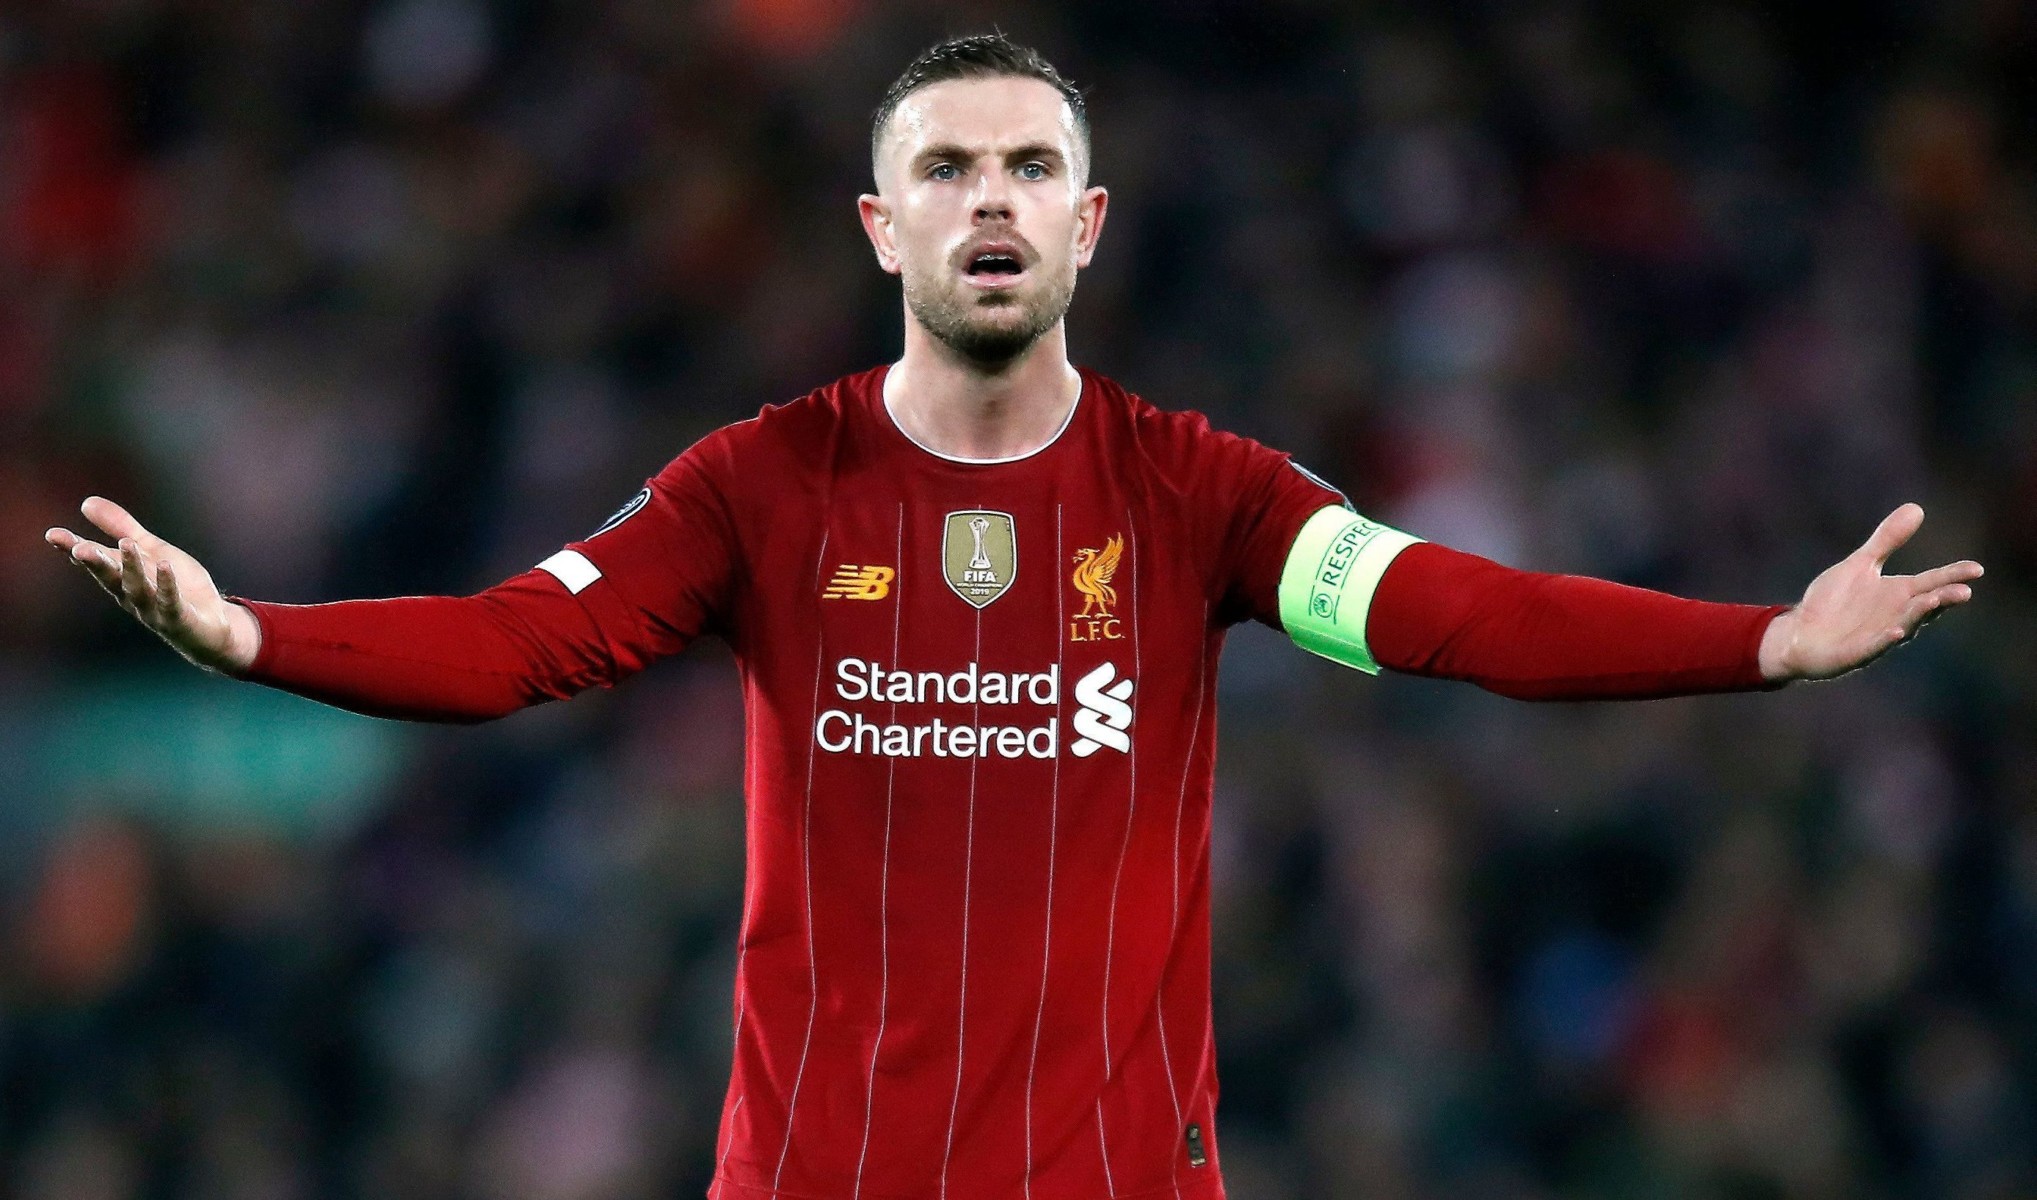 Skipper Jordan Henderson might see Liverpool crowned champs but it would be a hollow success unless the season is finished 